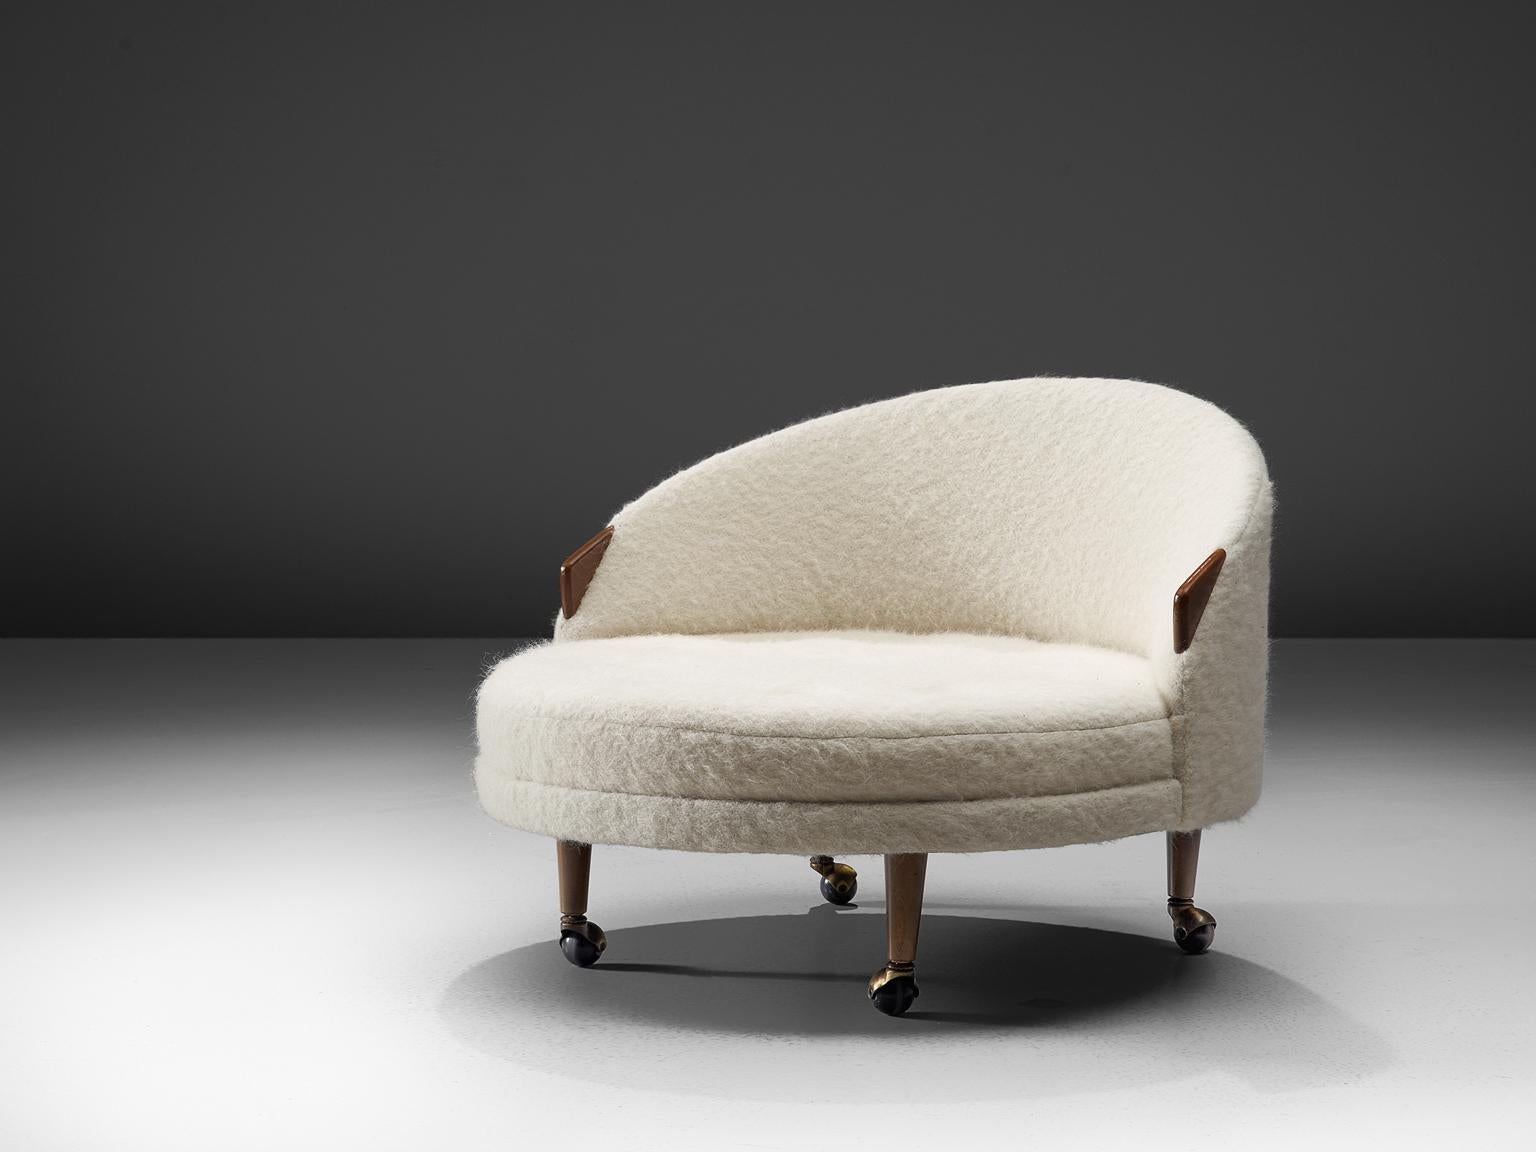 Adrian Pearsall for Craft Associates, 'Havana' lounge chair, walnut and Pierre Frey woollen upholstery with walnut, United States, 1960s.

This lounge chair with small walnut armrests and wheels underneath each item, are designed by Adrian